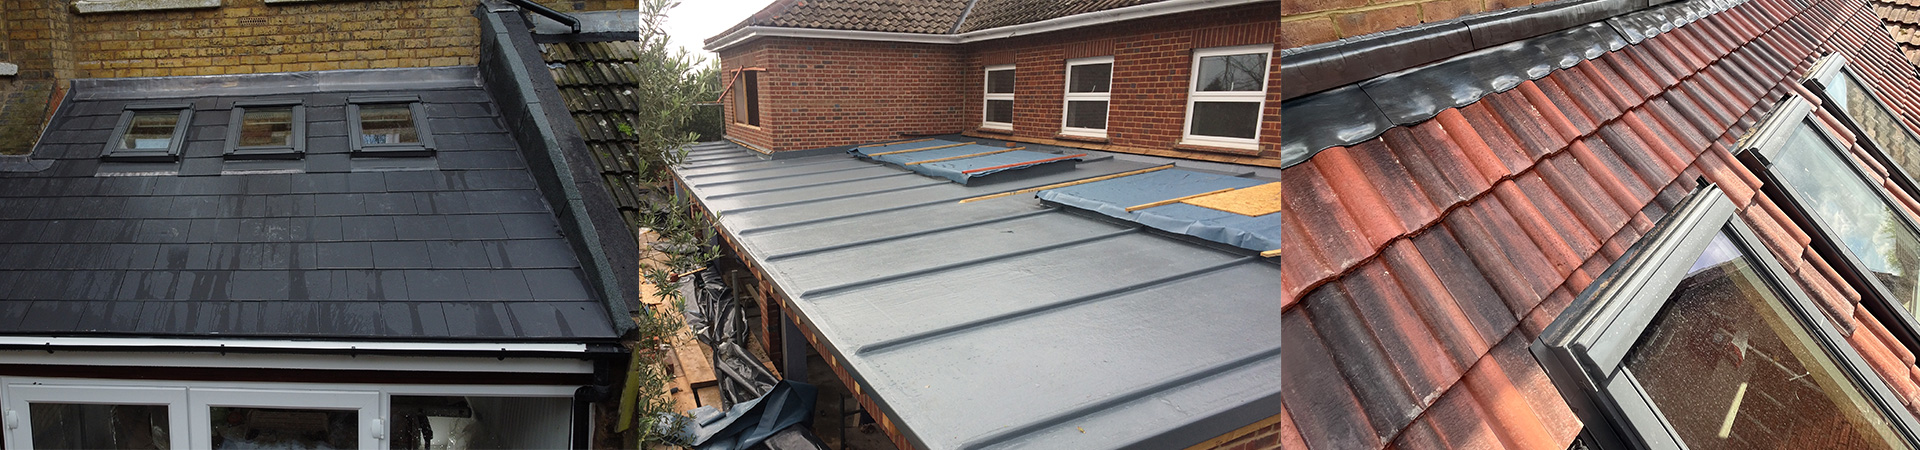 Roofing by Wanstall Limited